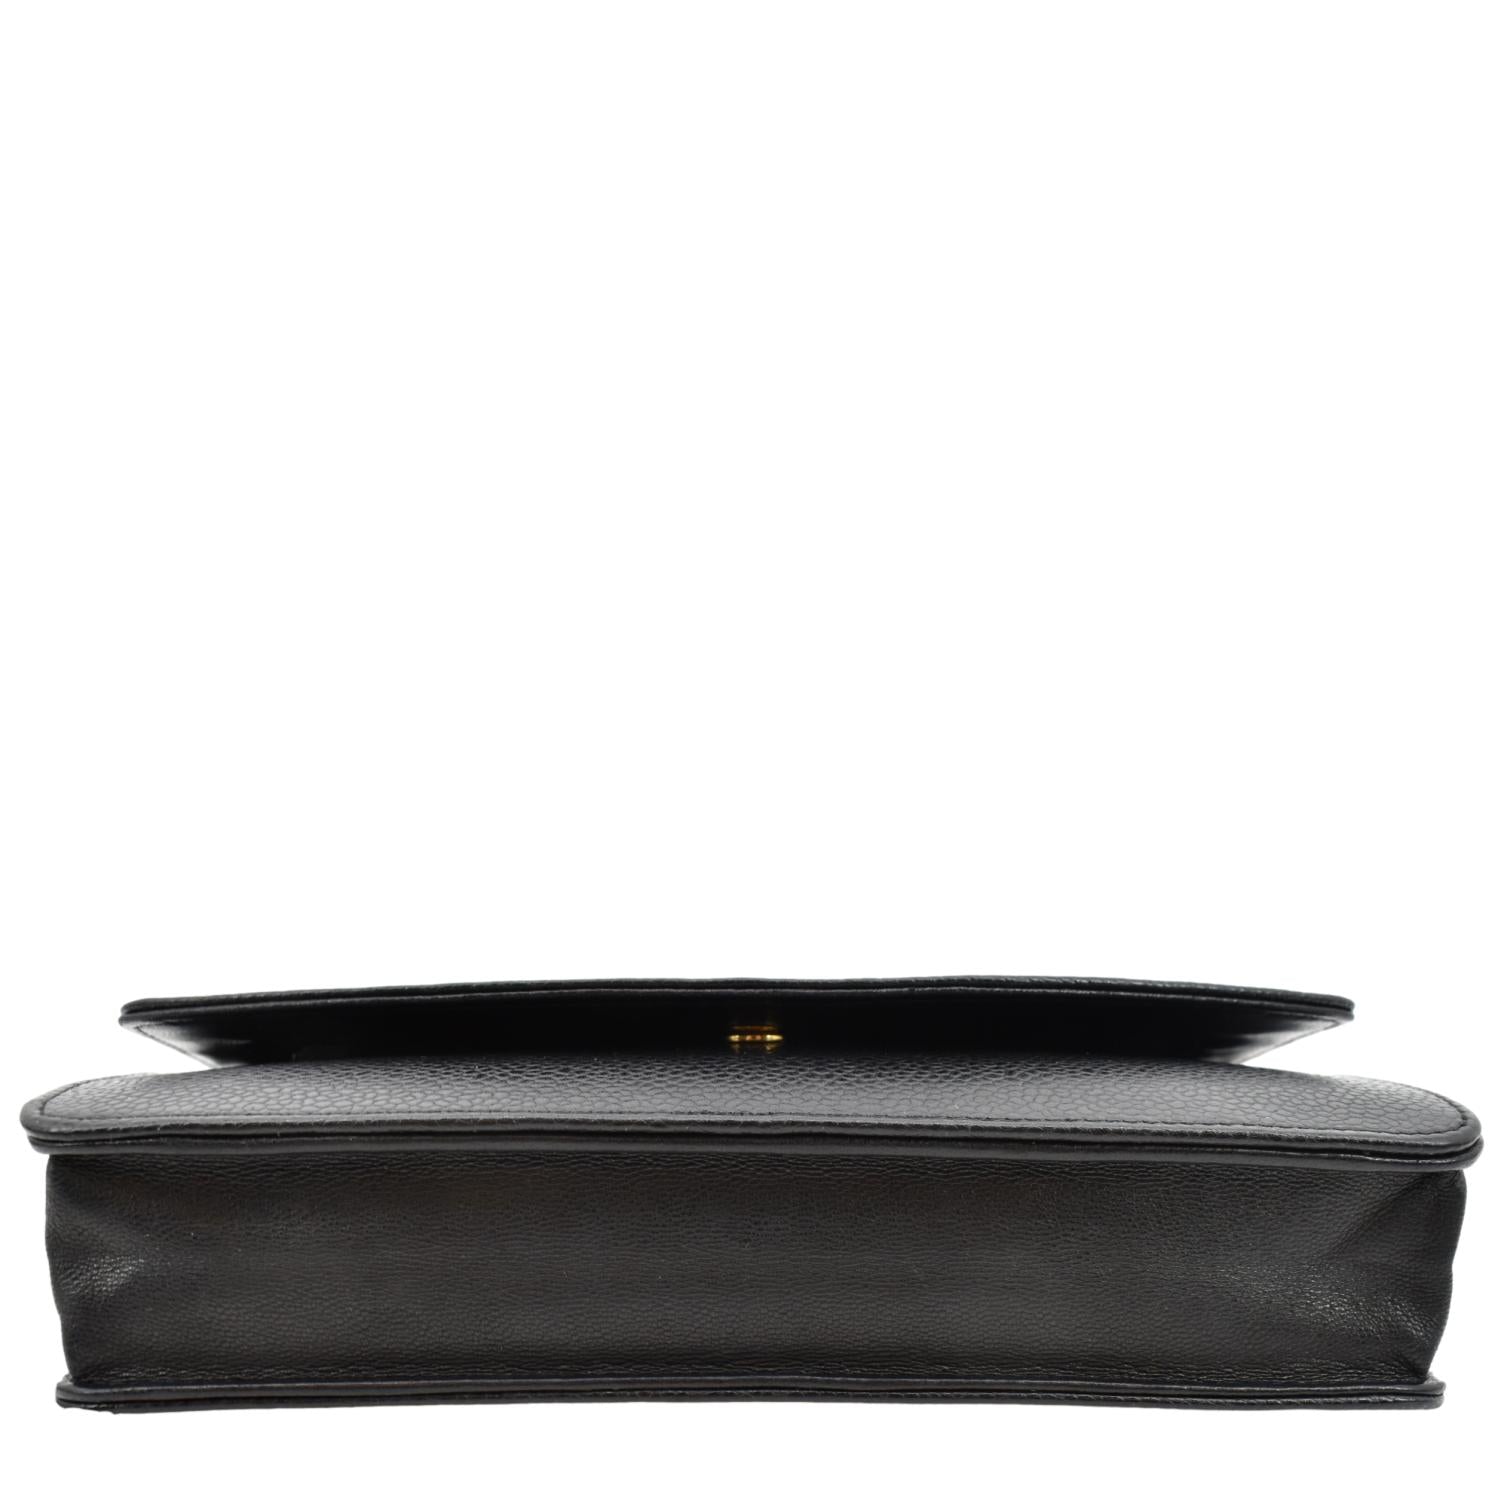 Timeless/classique leather wallet Chanel Black in Leather - 31620564